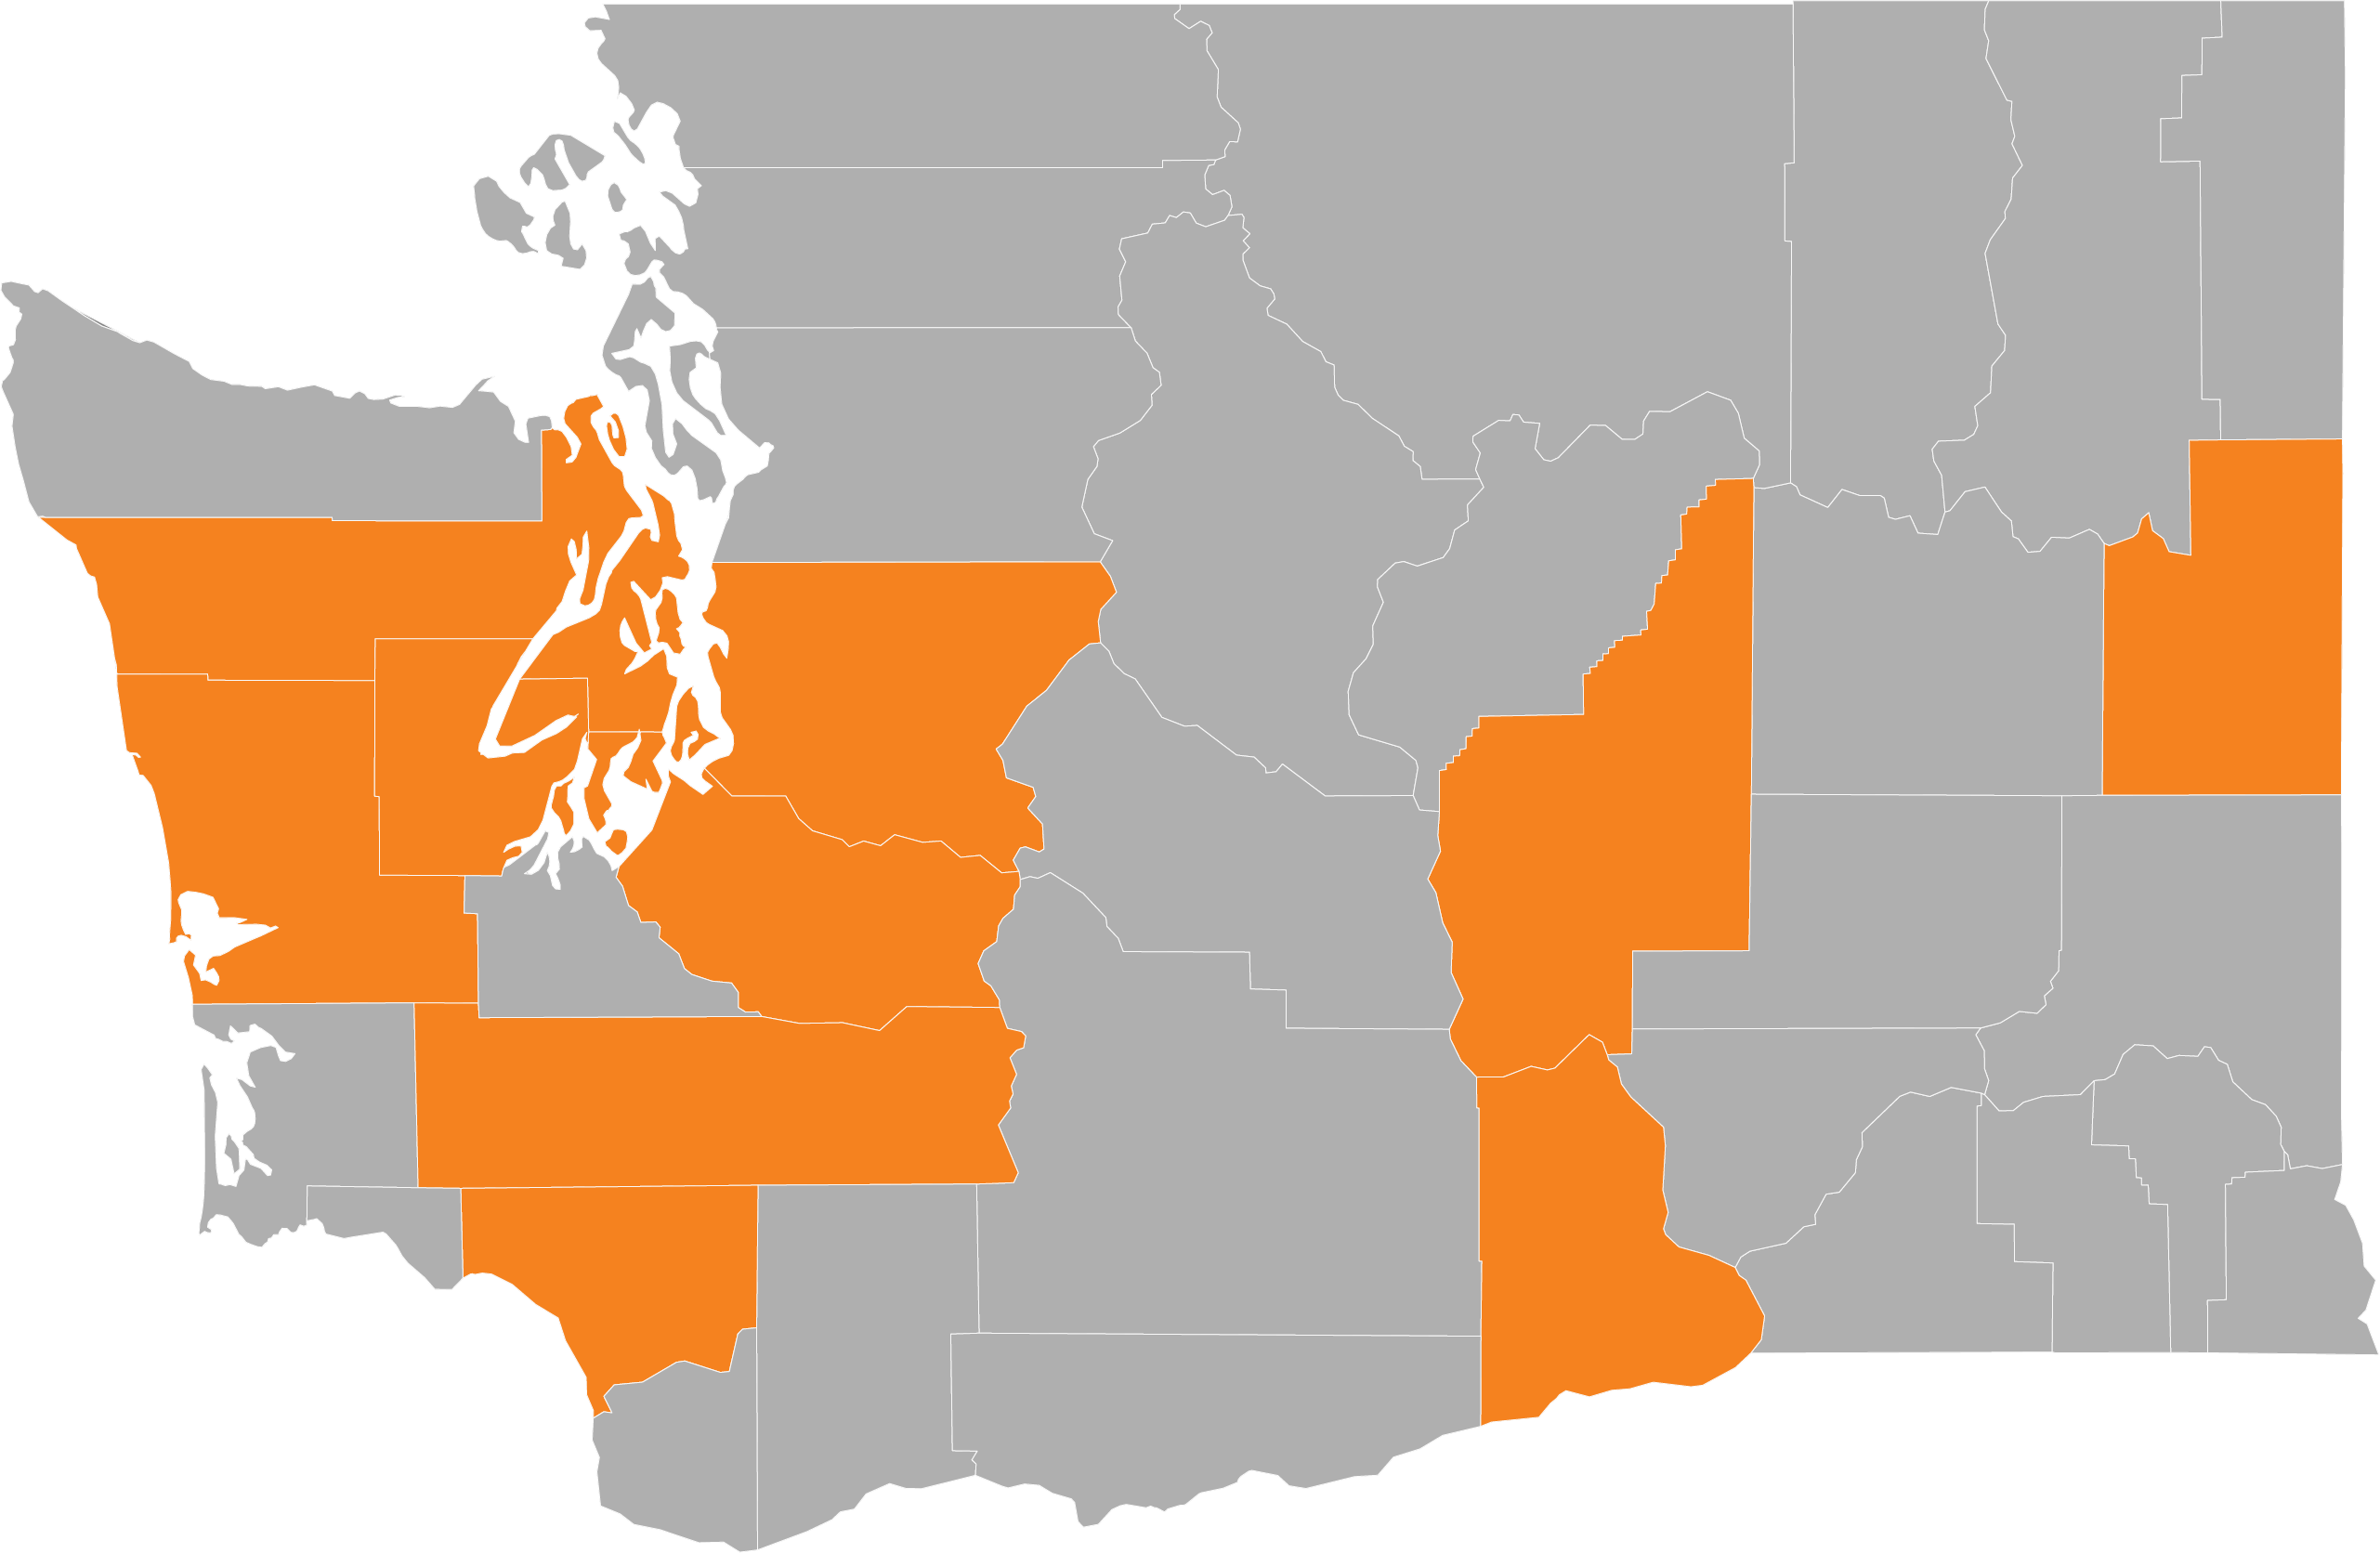 Washington state map with 11 counties colored in orange to represent Connect to Wellness.